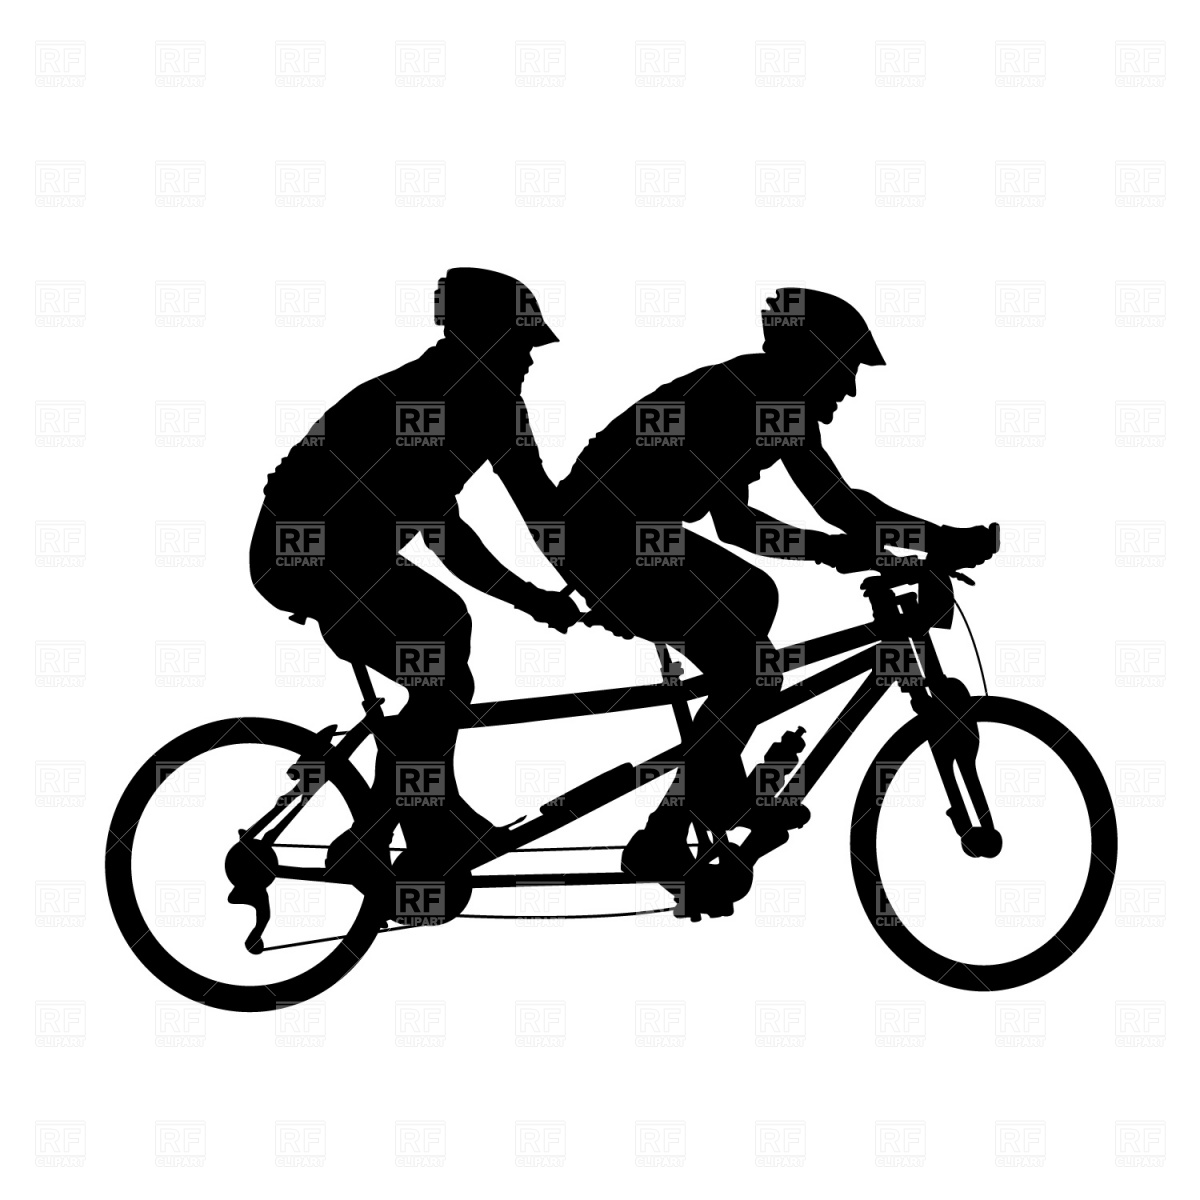 Tandem Bicycle Silhouette